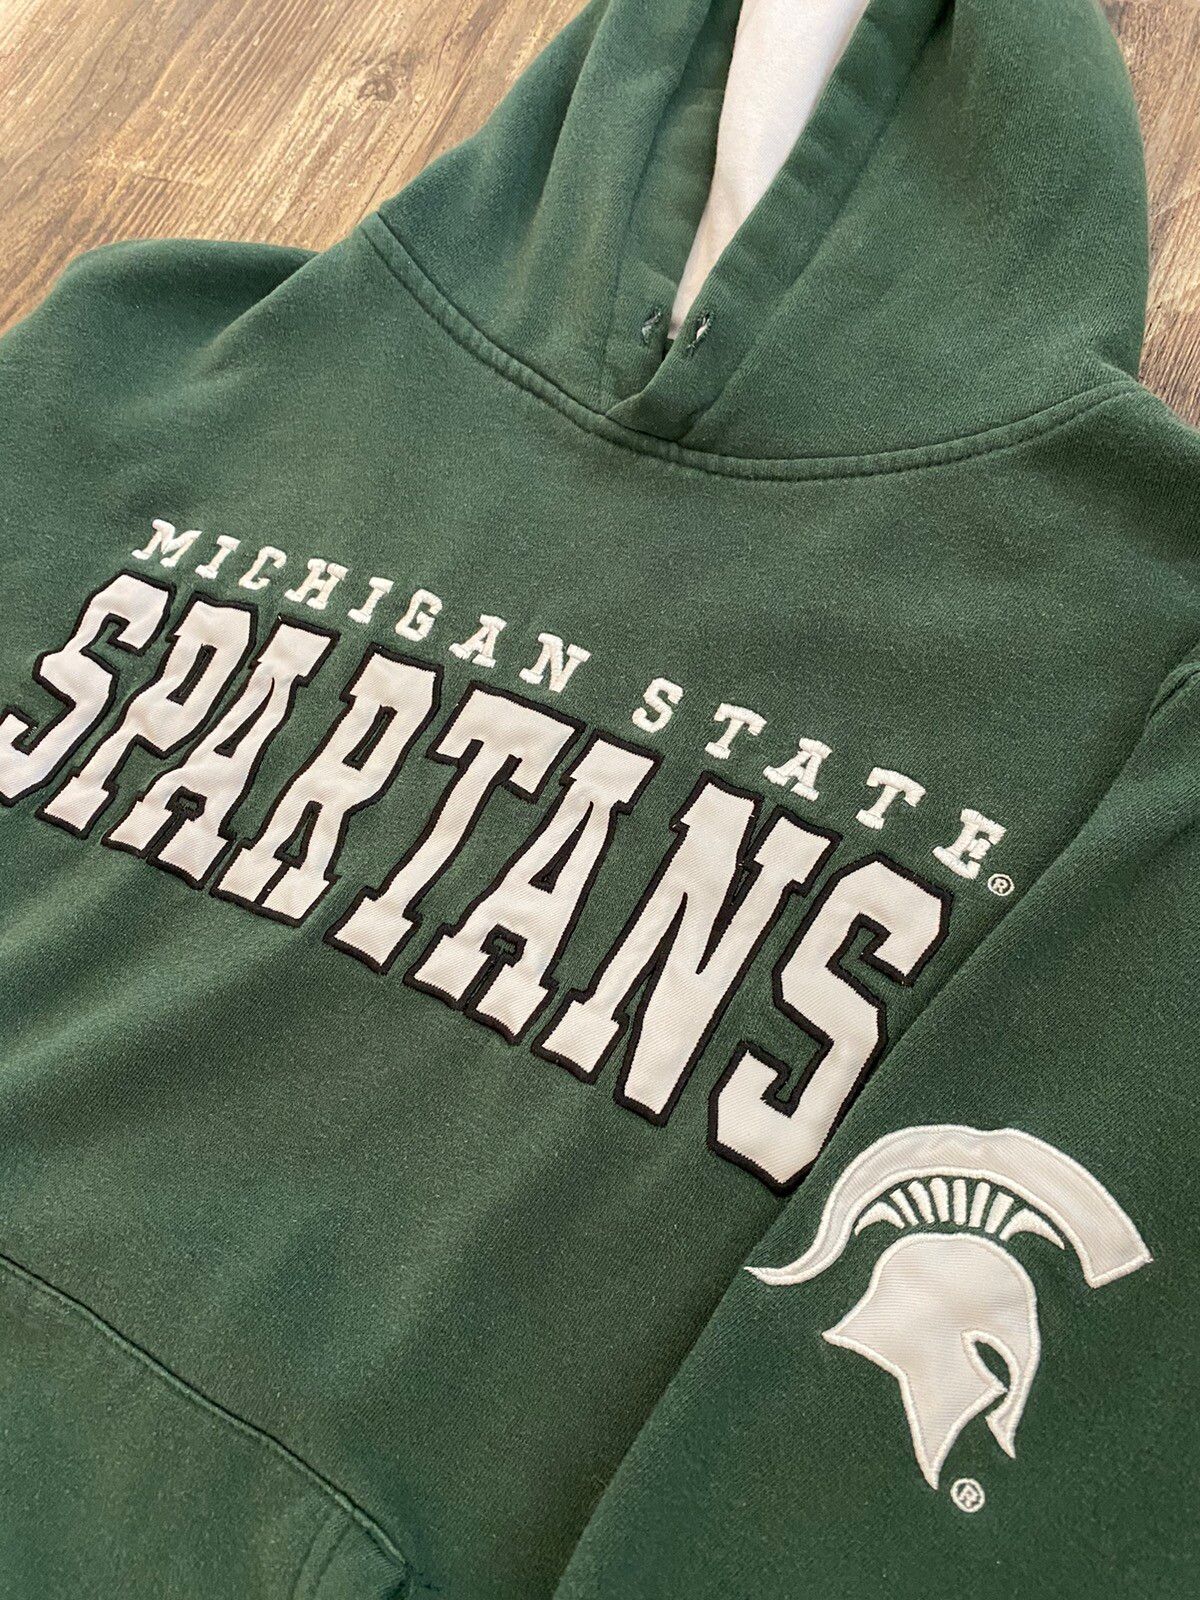 Vintage Y2K 2000s Faded Michigan State Spartans Spellout Hoodie Size US S / EU 44-46 / 1 - 4 Thumbnail